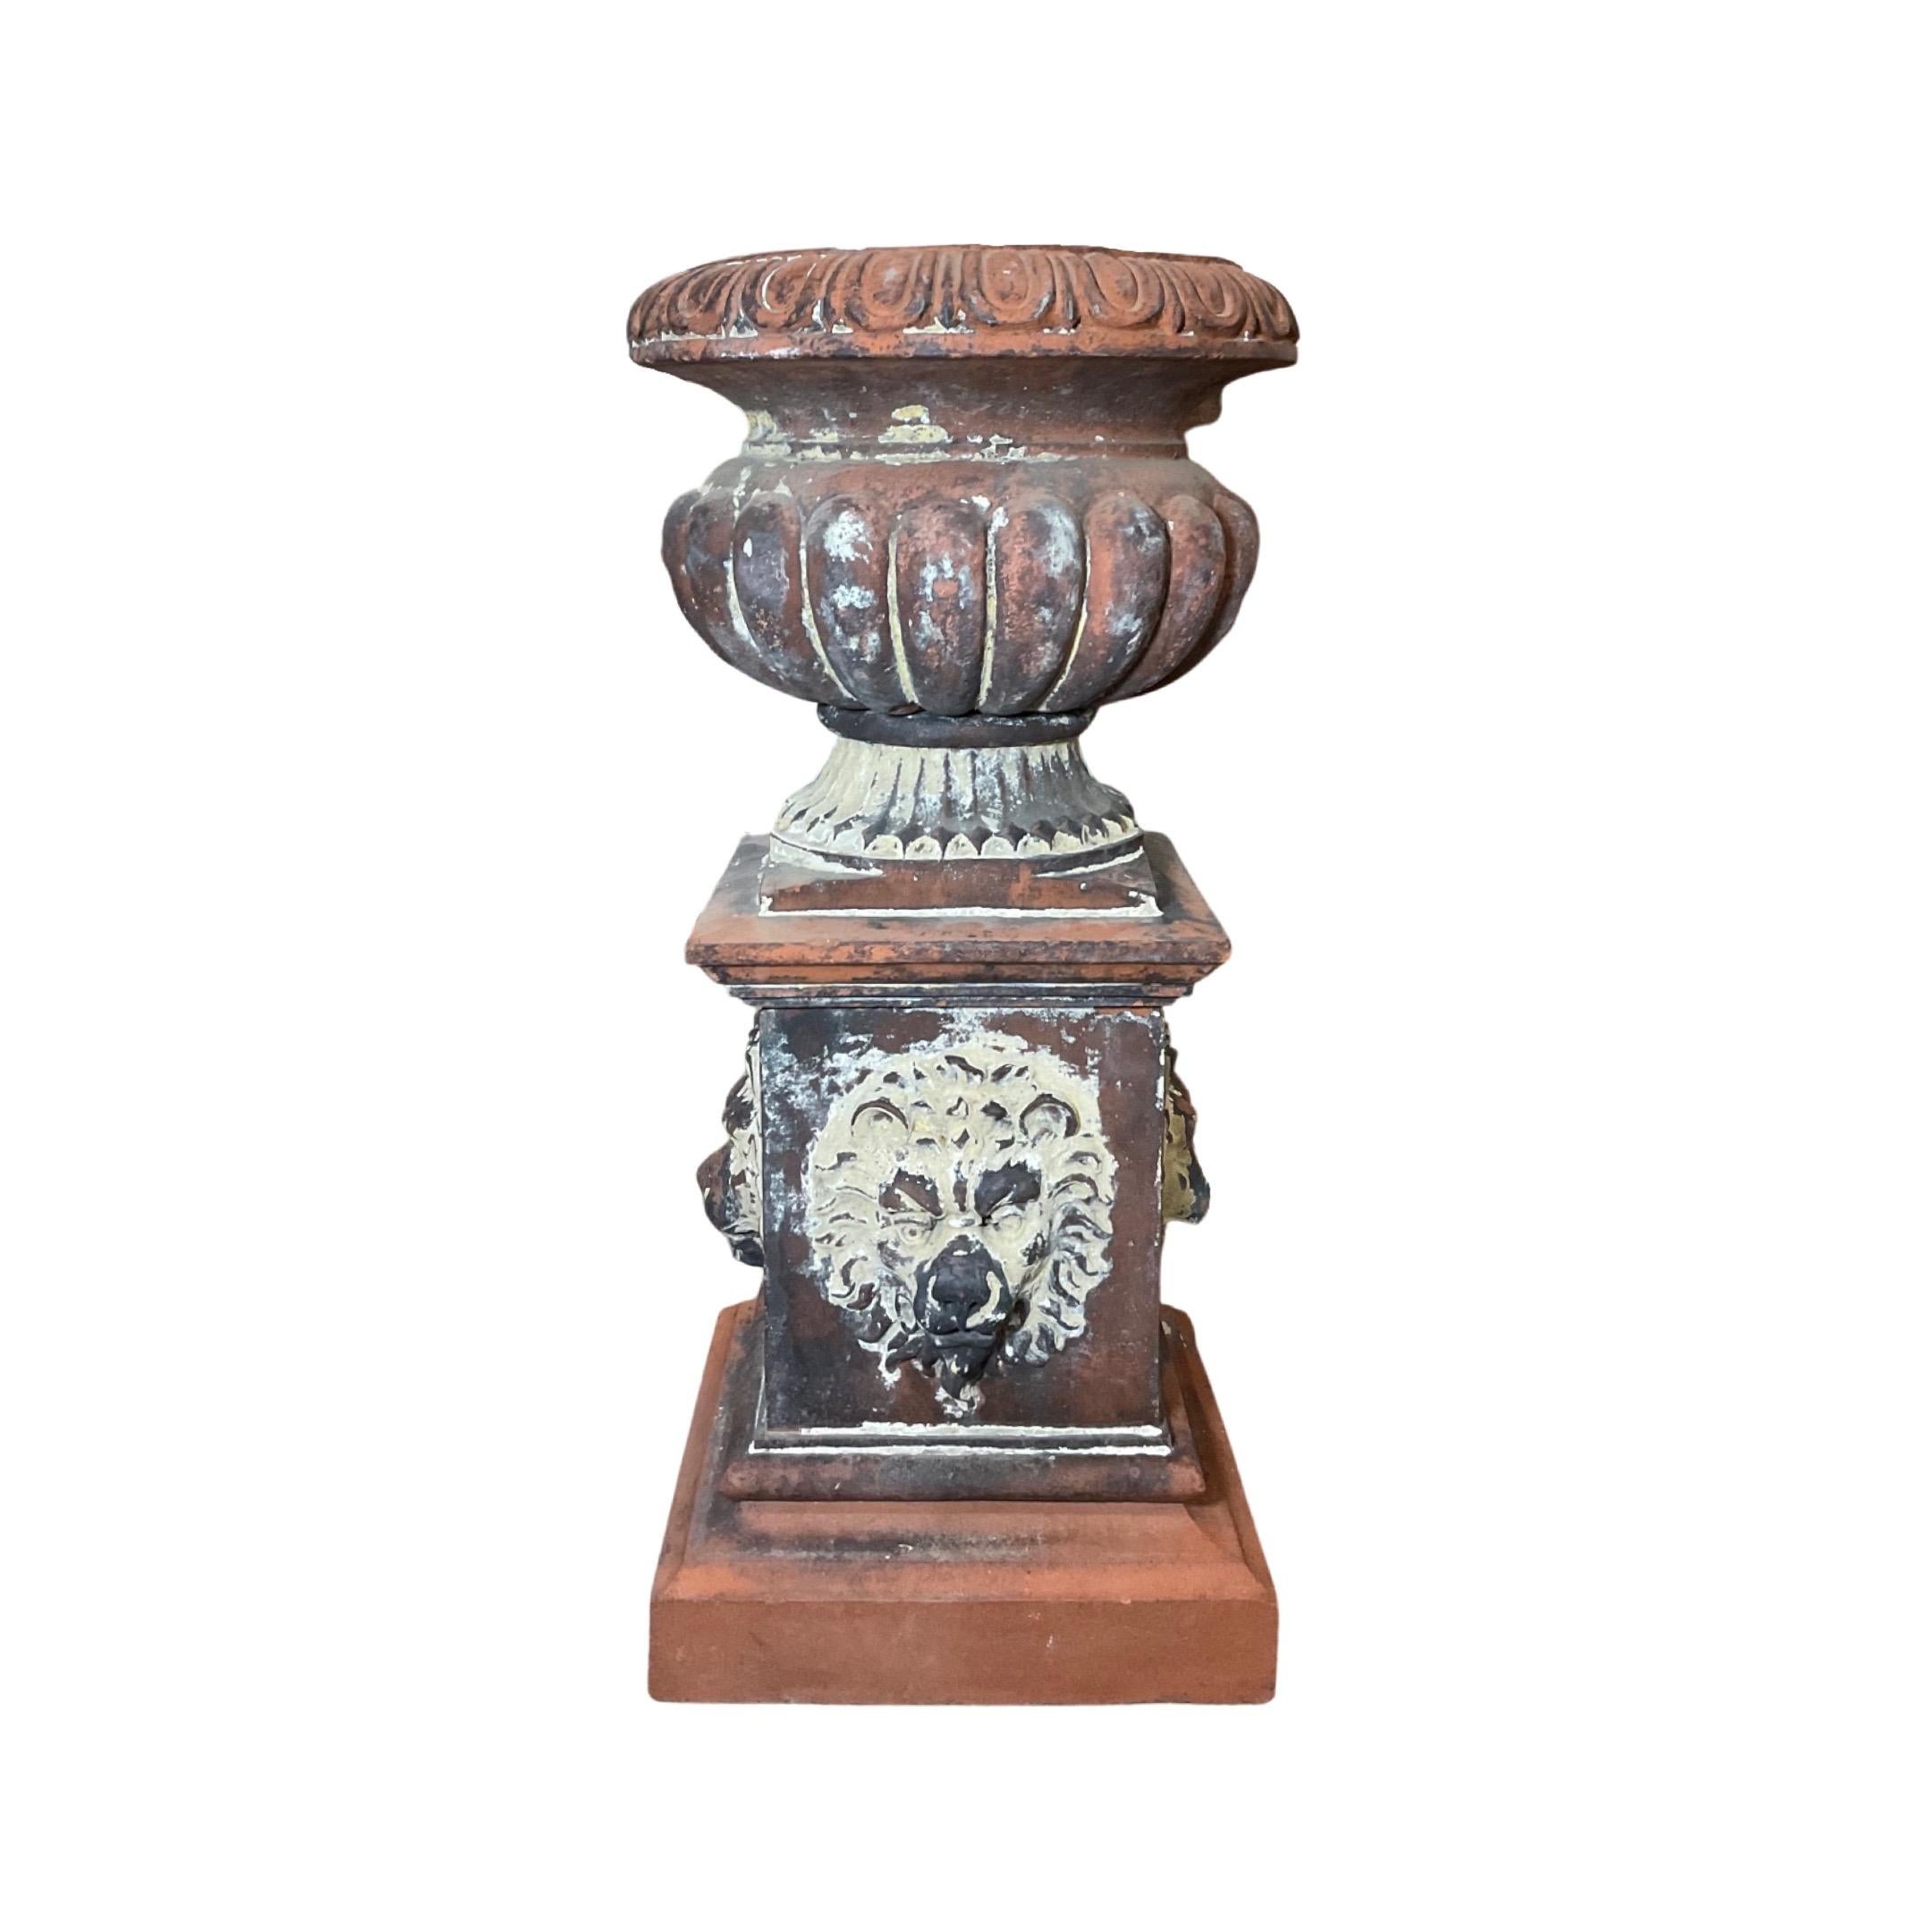 This England Terracotta Planter is an elegant 19th-century piece, crafted from durable terracotta and featuring intricate lion head motif carvings along the base. The planter comes with the base included, adding to its versatility when decorating